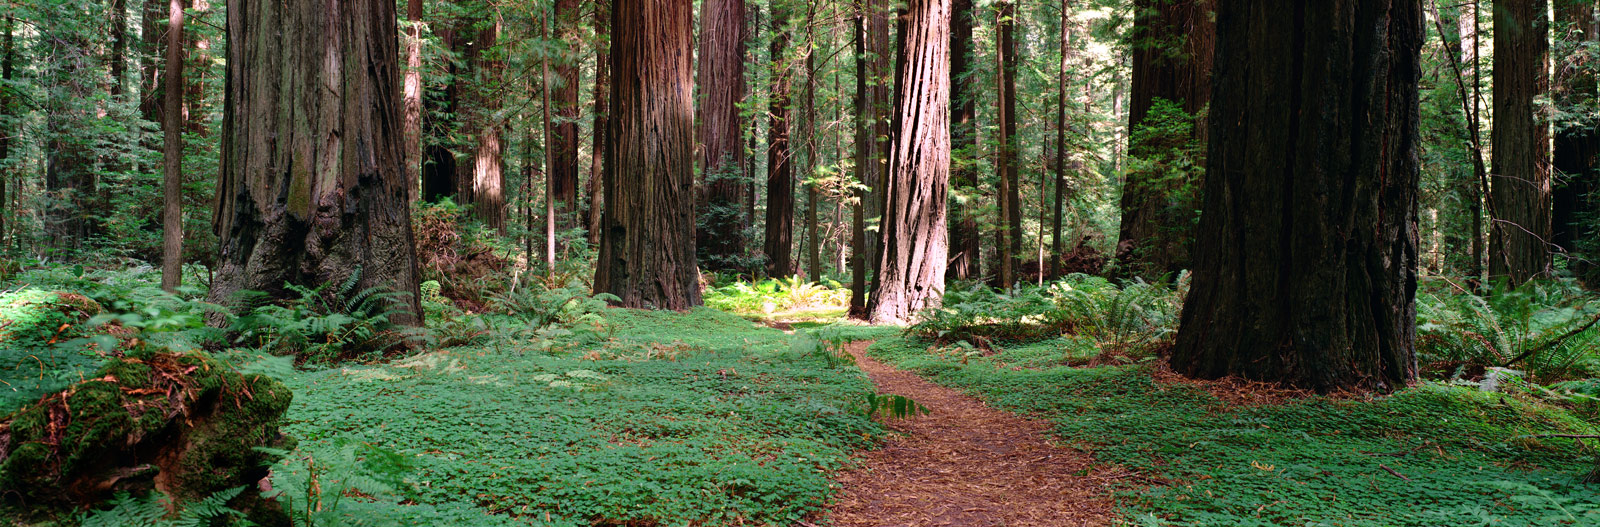 Download this Redwood Forest picture